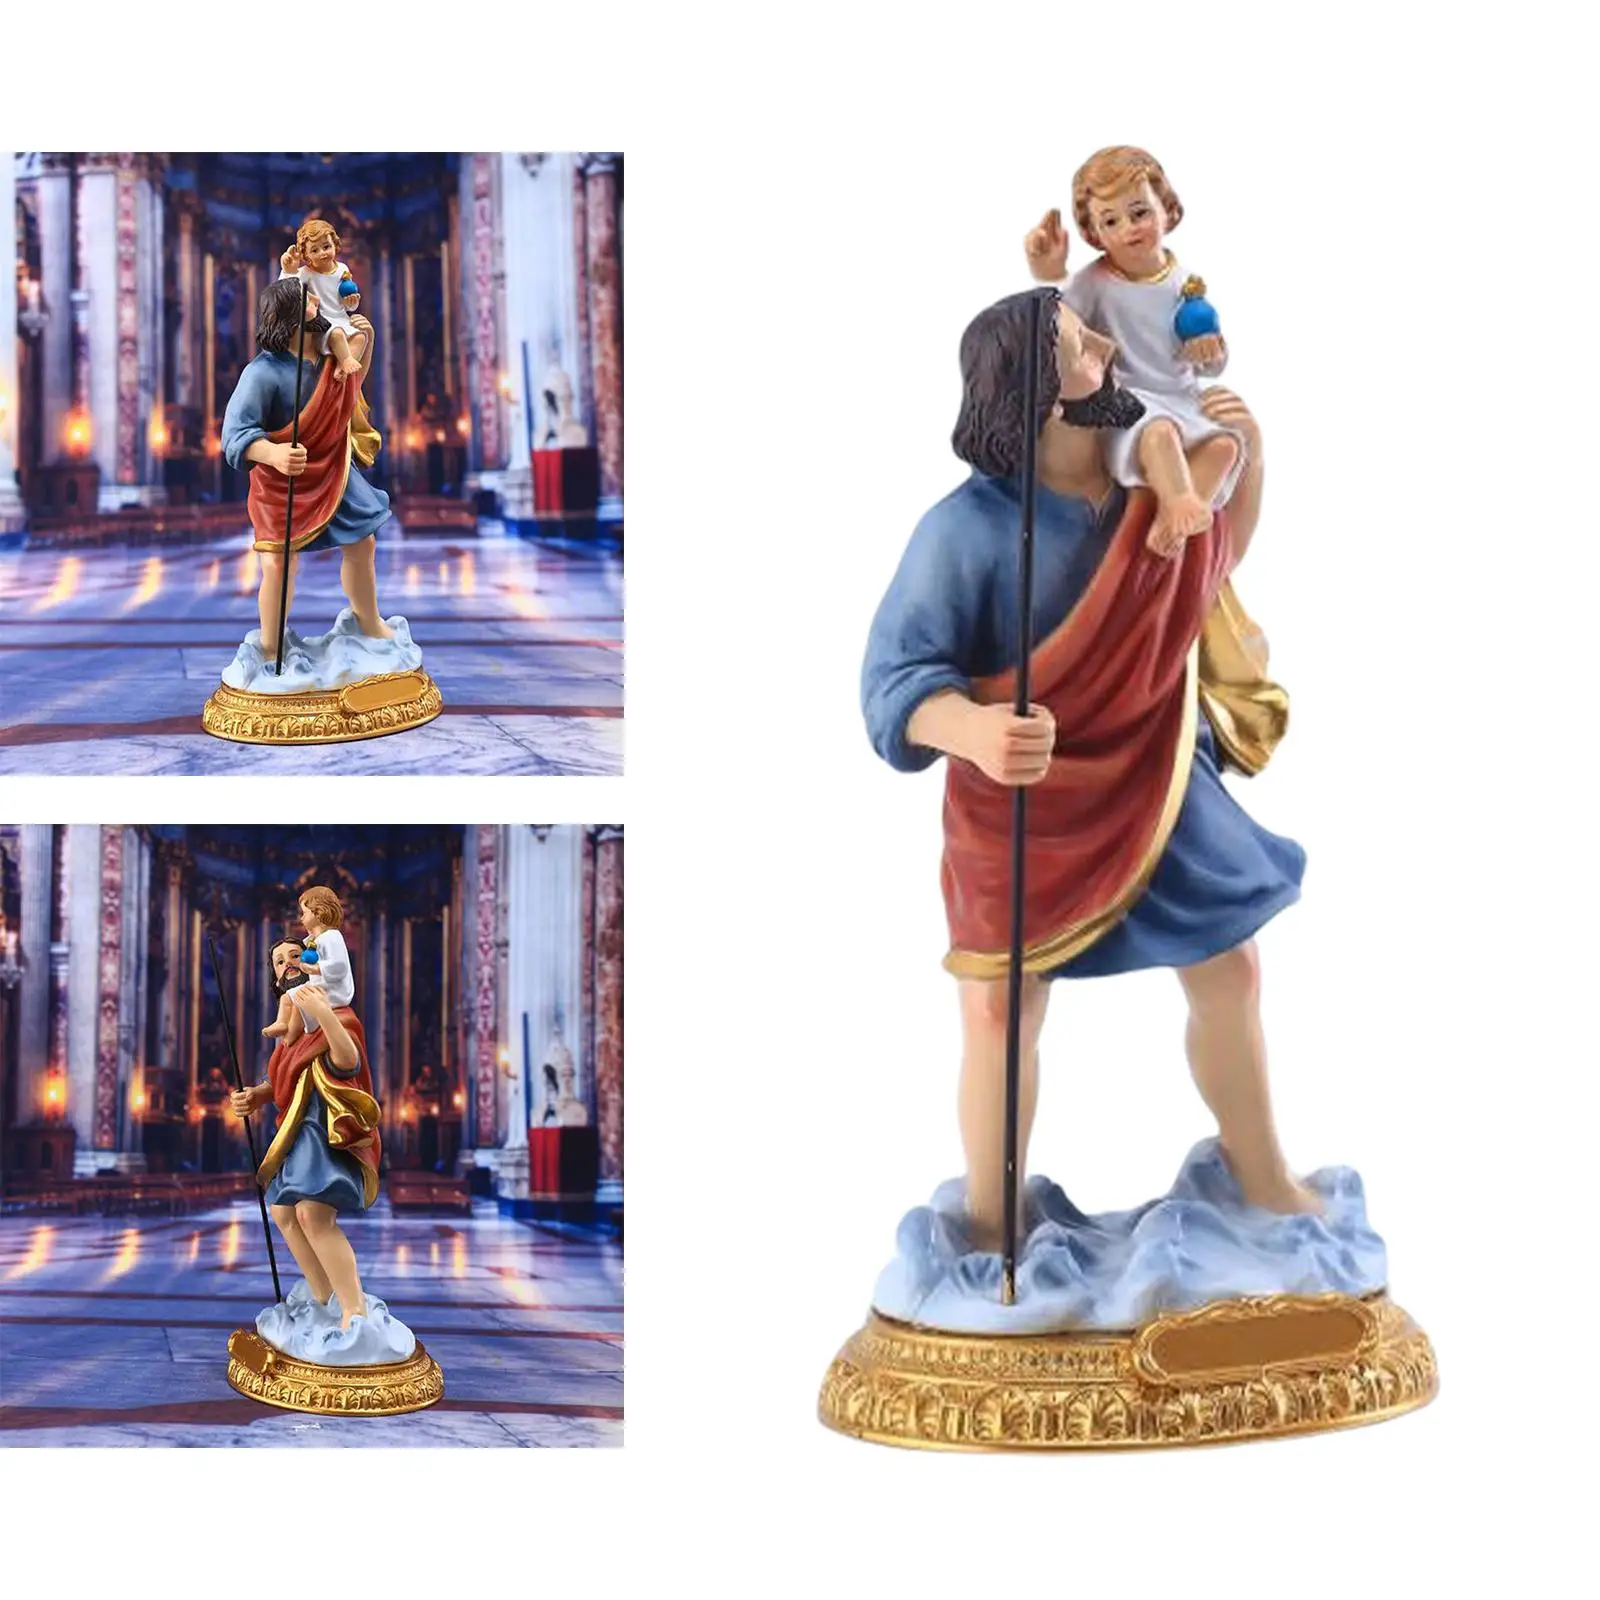 Resin Holy Family Statue Home Decor Church Ornament Jesus Statues Sculpture for Living Room Desktop Home Bedroom Collection